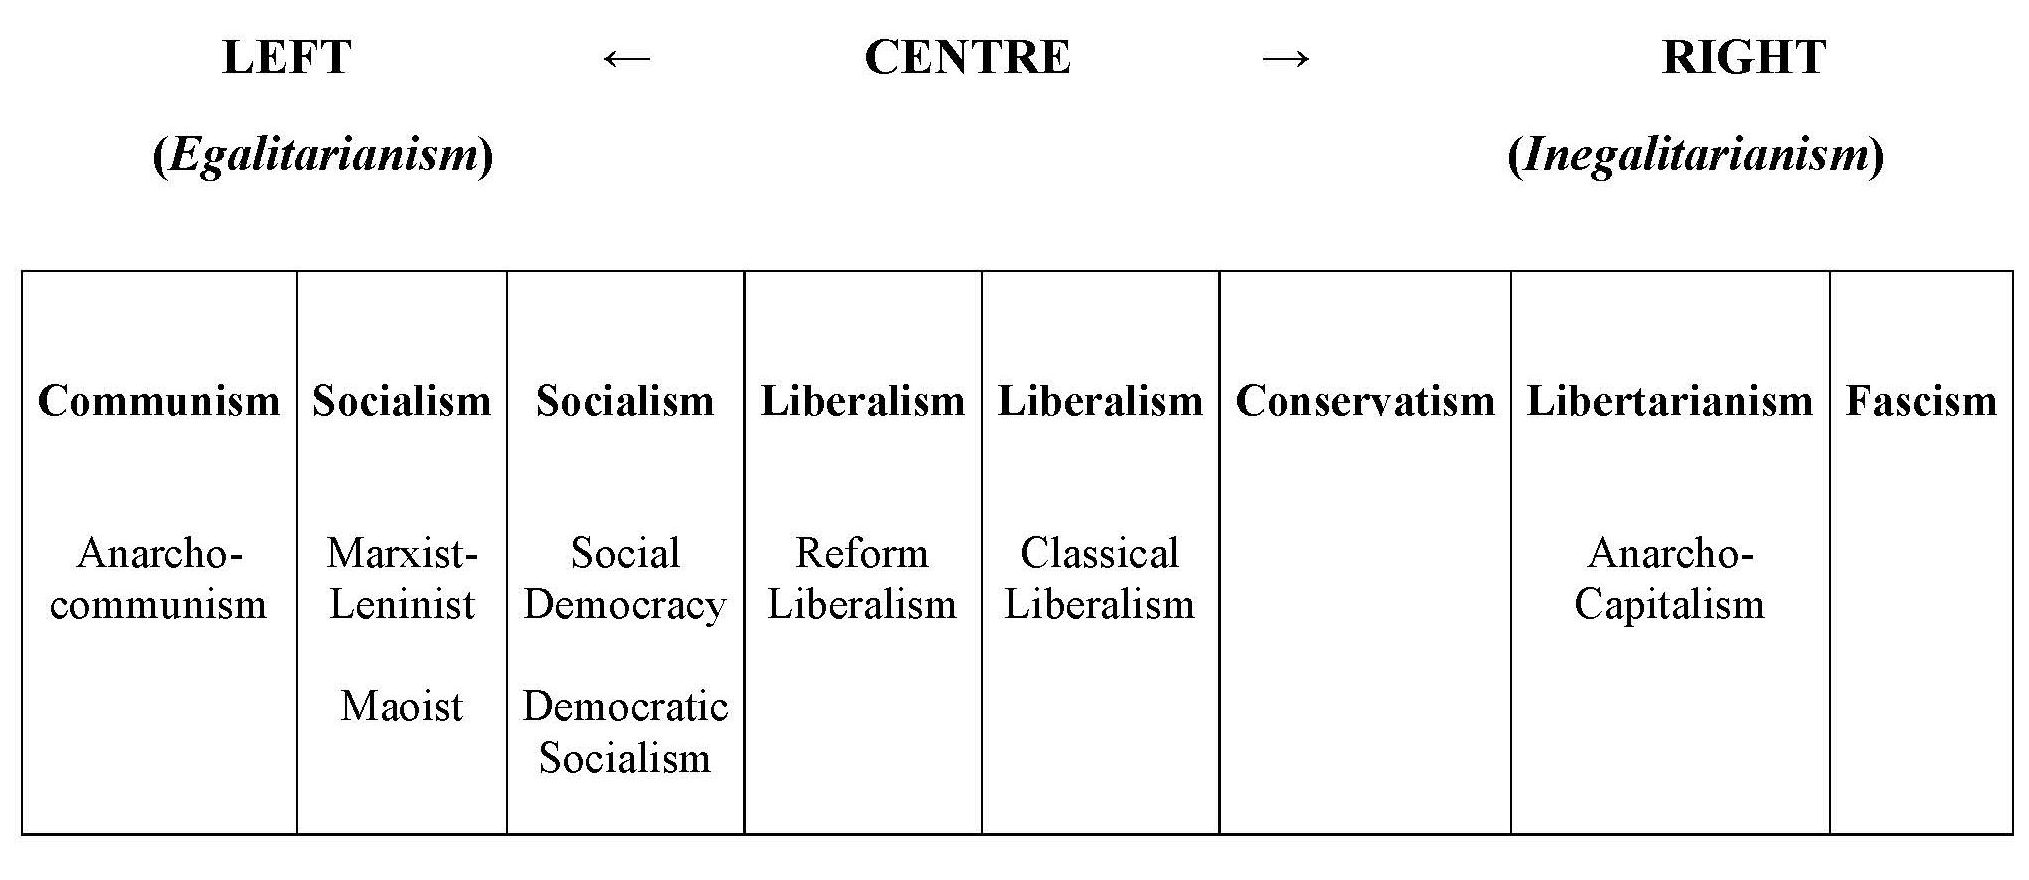 Chart illustrating the left-right ideological spectrum from communism to fascism.